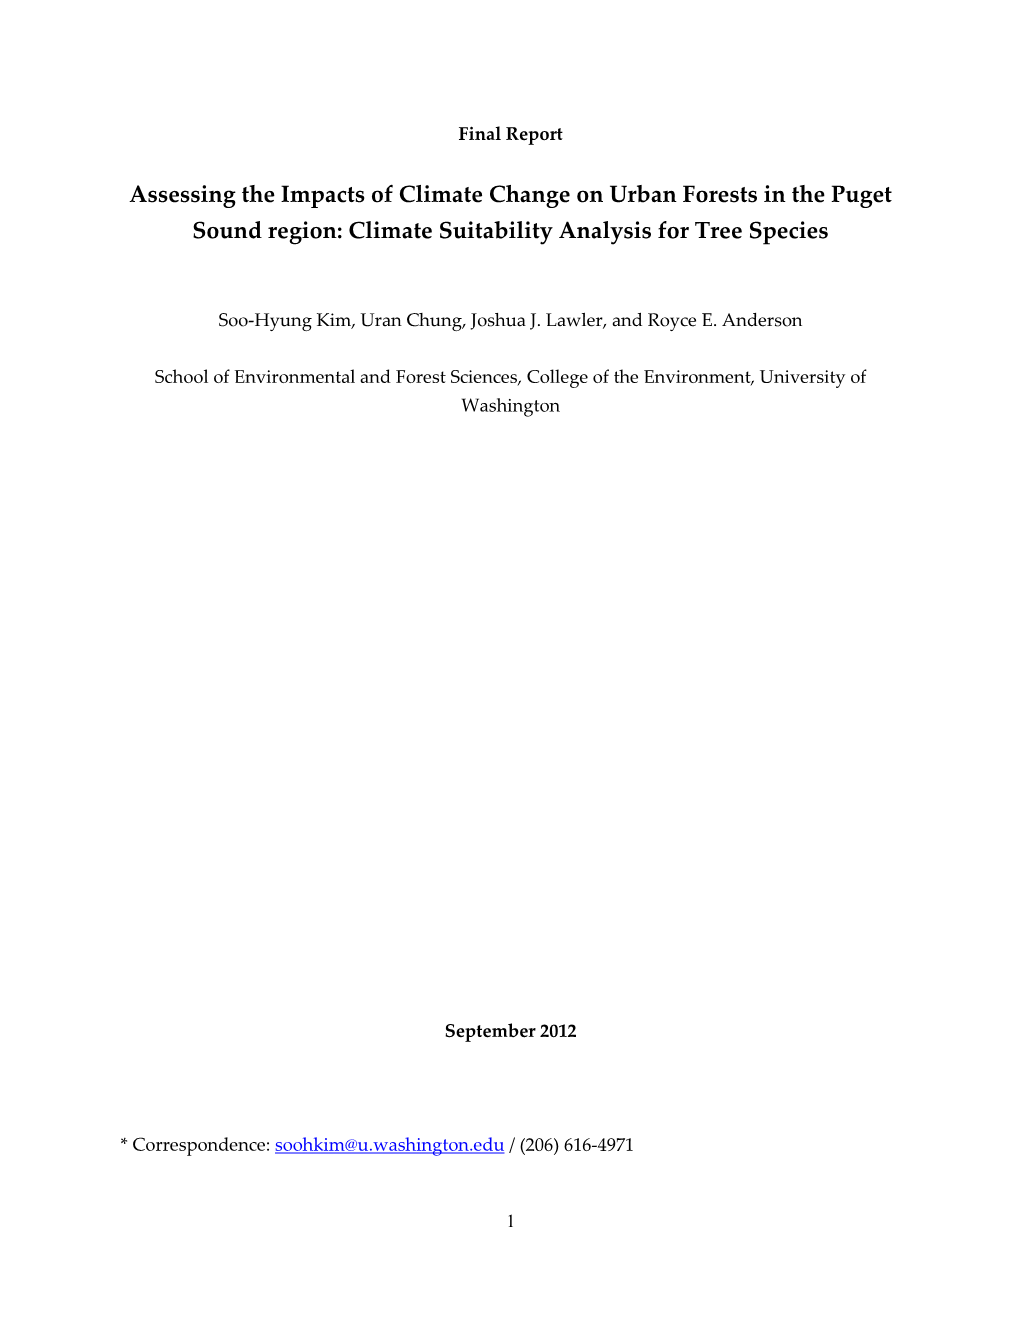 Assessing the Impacts of Climate Change on Urban Forests in the Puget Sound Region: Climate Suitability Analysis for Tree Species